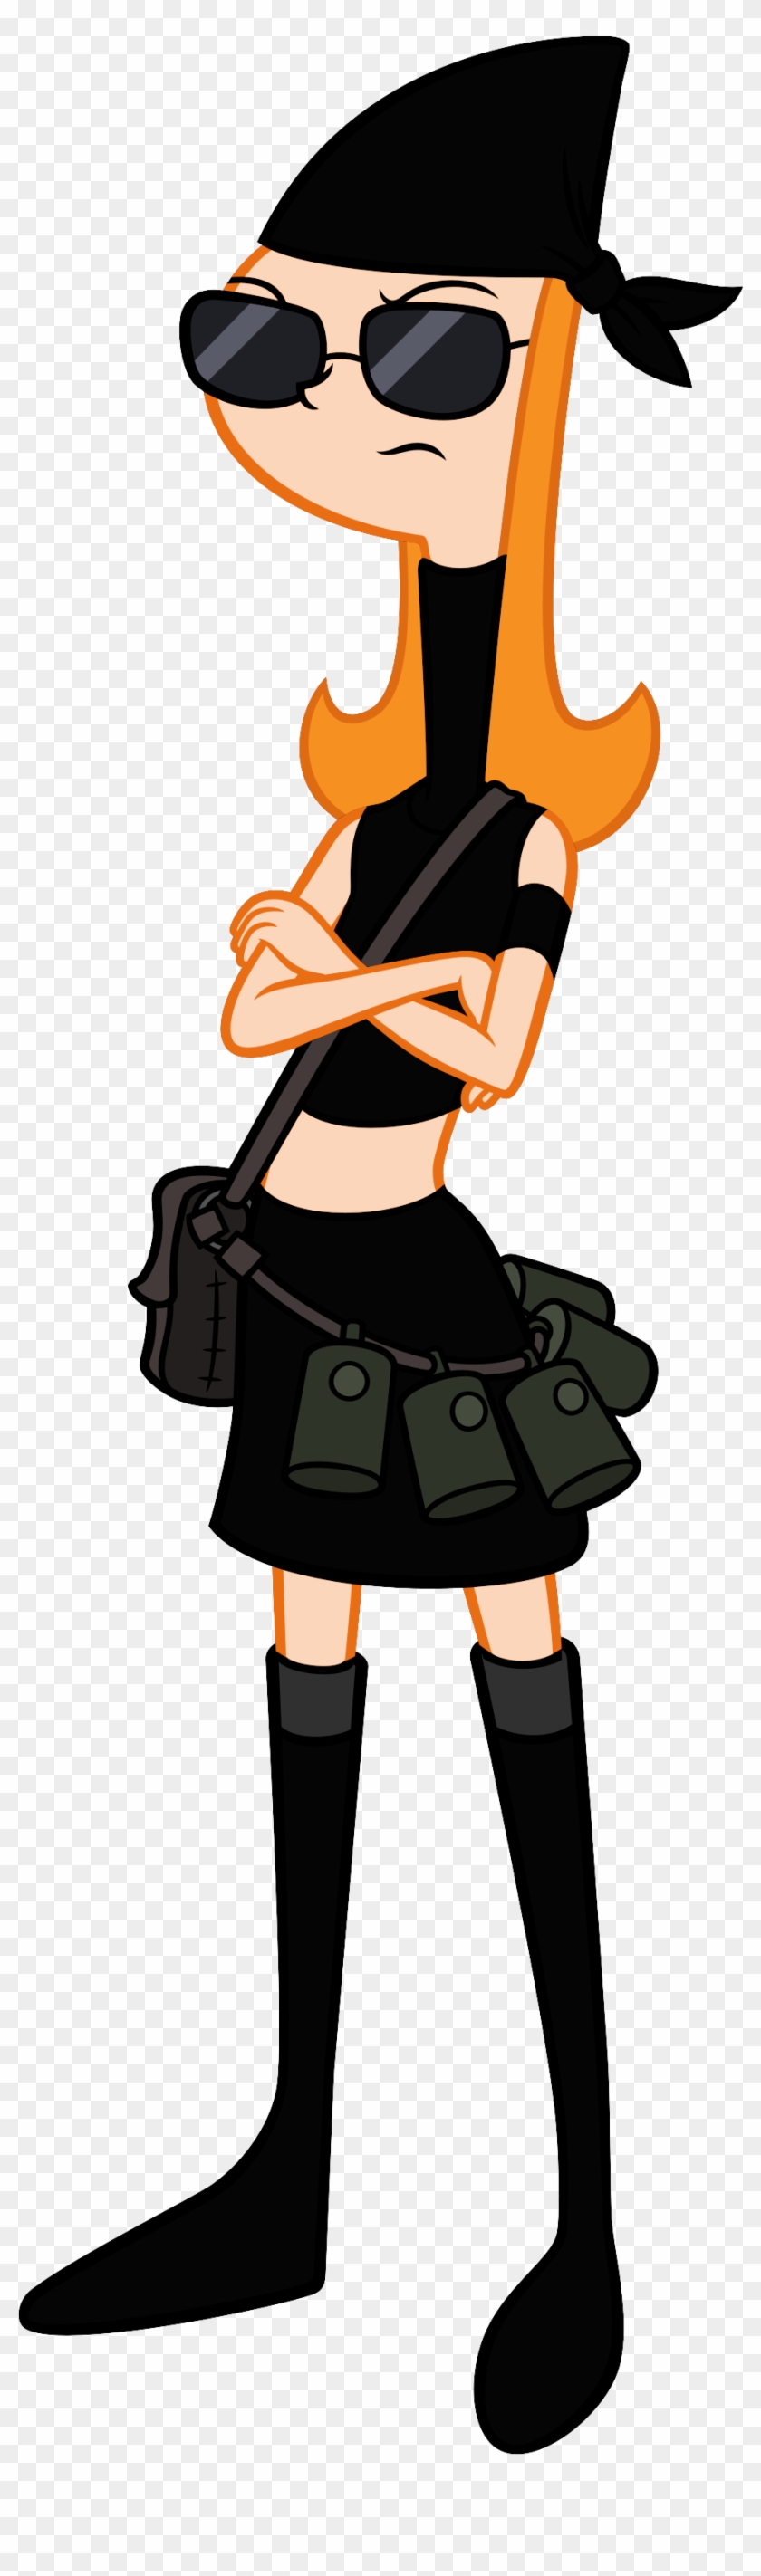 Bare Your Midriff - Candace Phineas And Ferb Movie Clipart #4366470